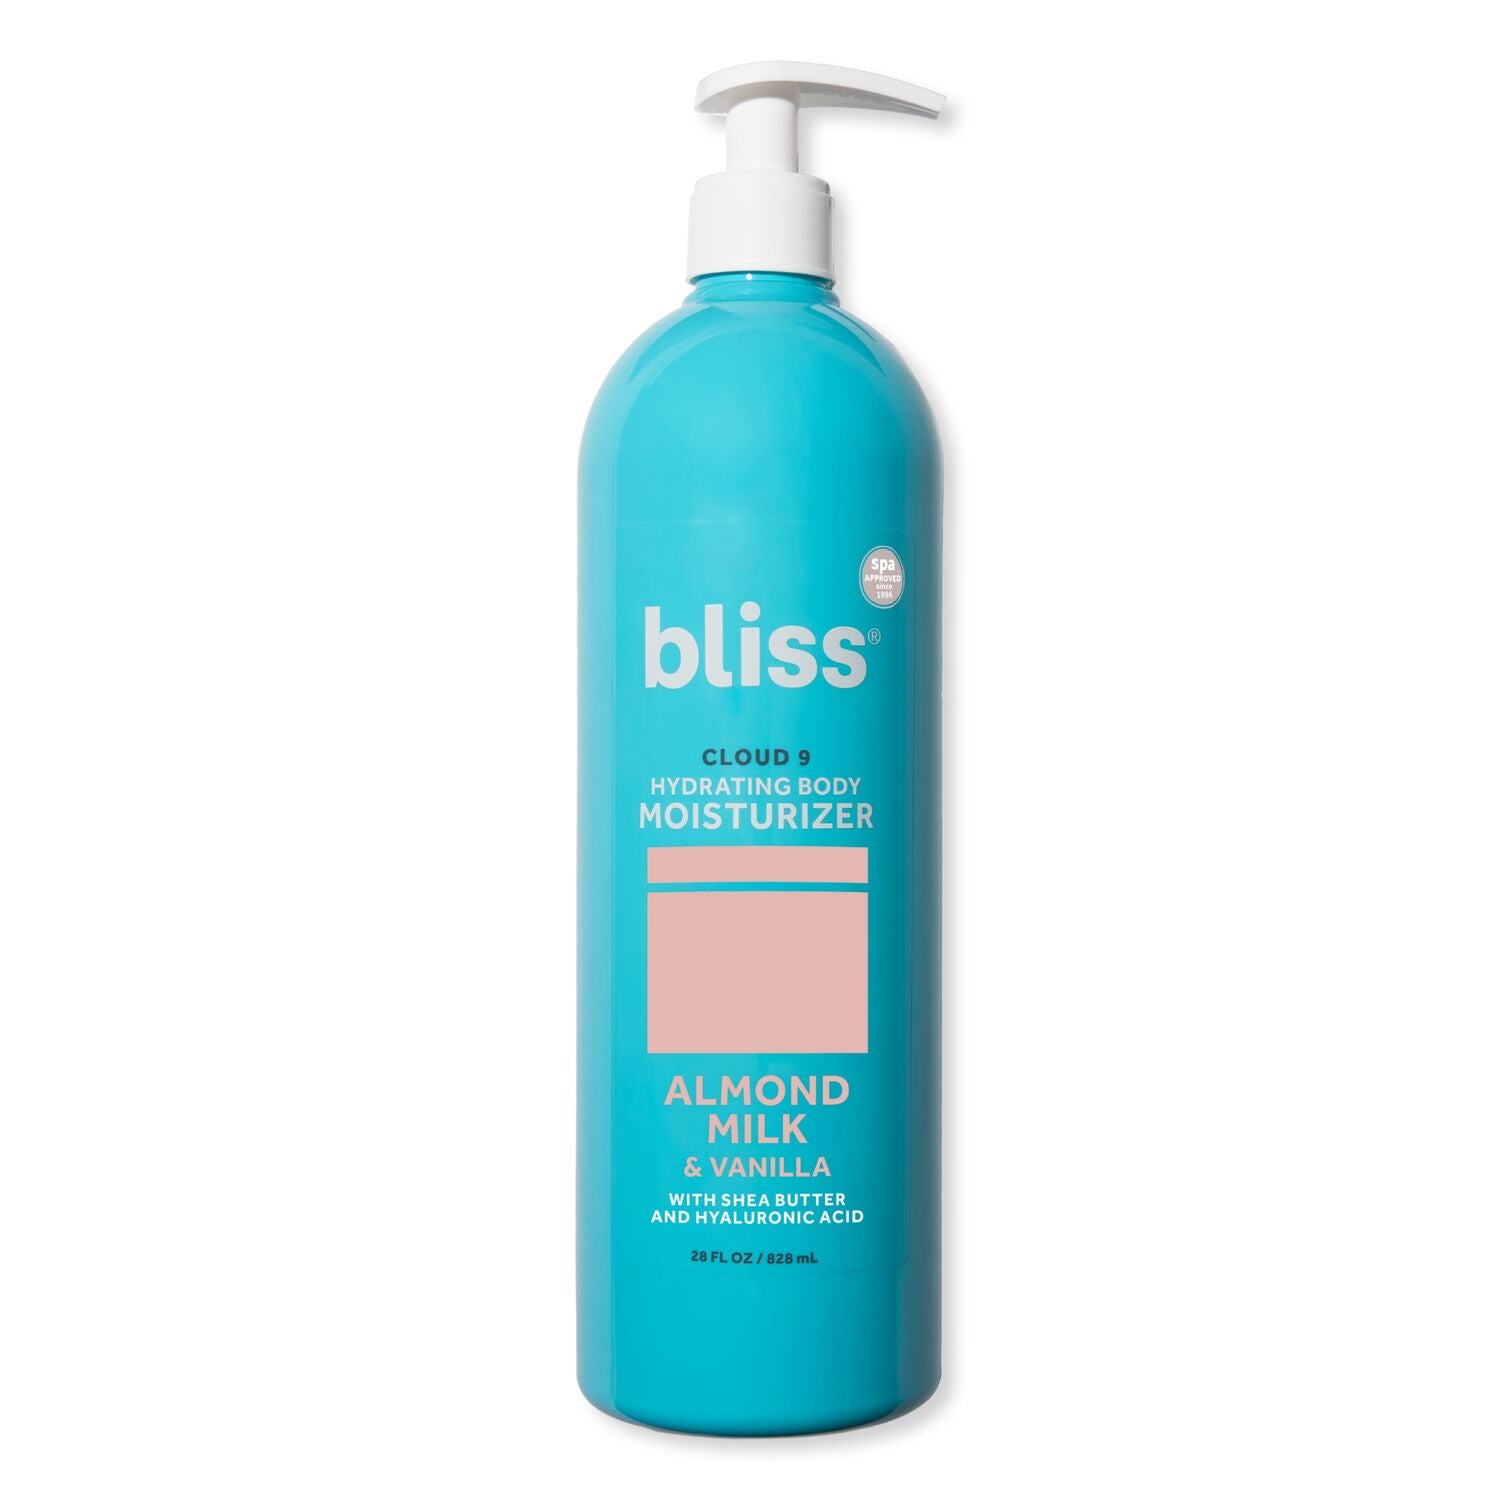 Bliss World Store Cloud 9 Hydrating Body Moisturizer, Almond Milk & Vanilla With Shea Butter And Hyaluronic Acid